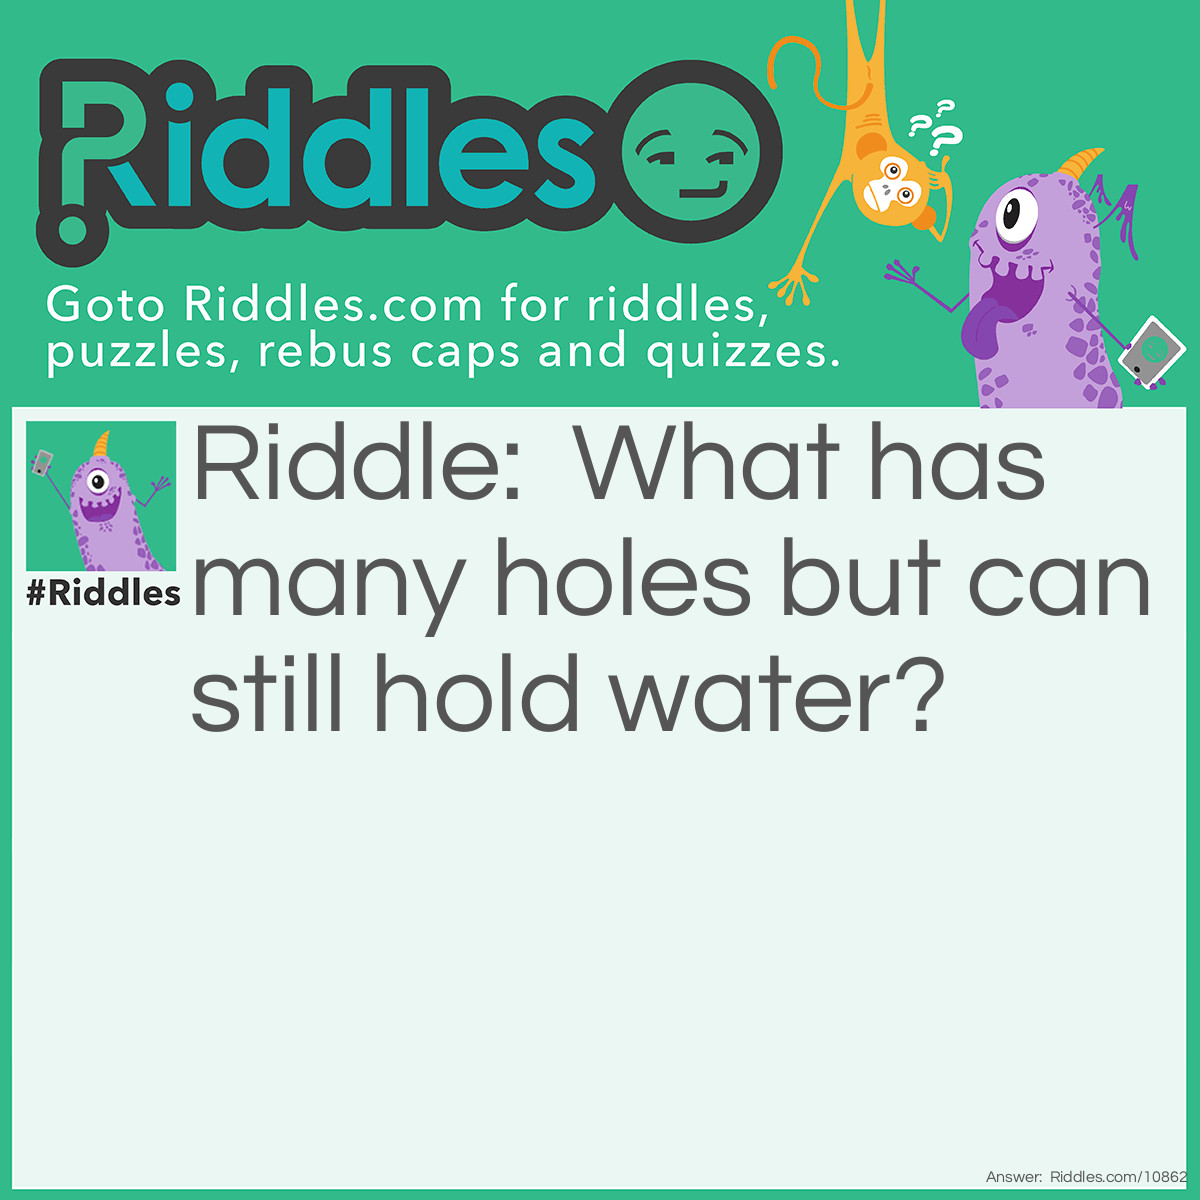 Riddle: What has many holes but can still hold water? Answer: A sponge!